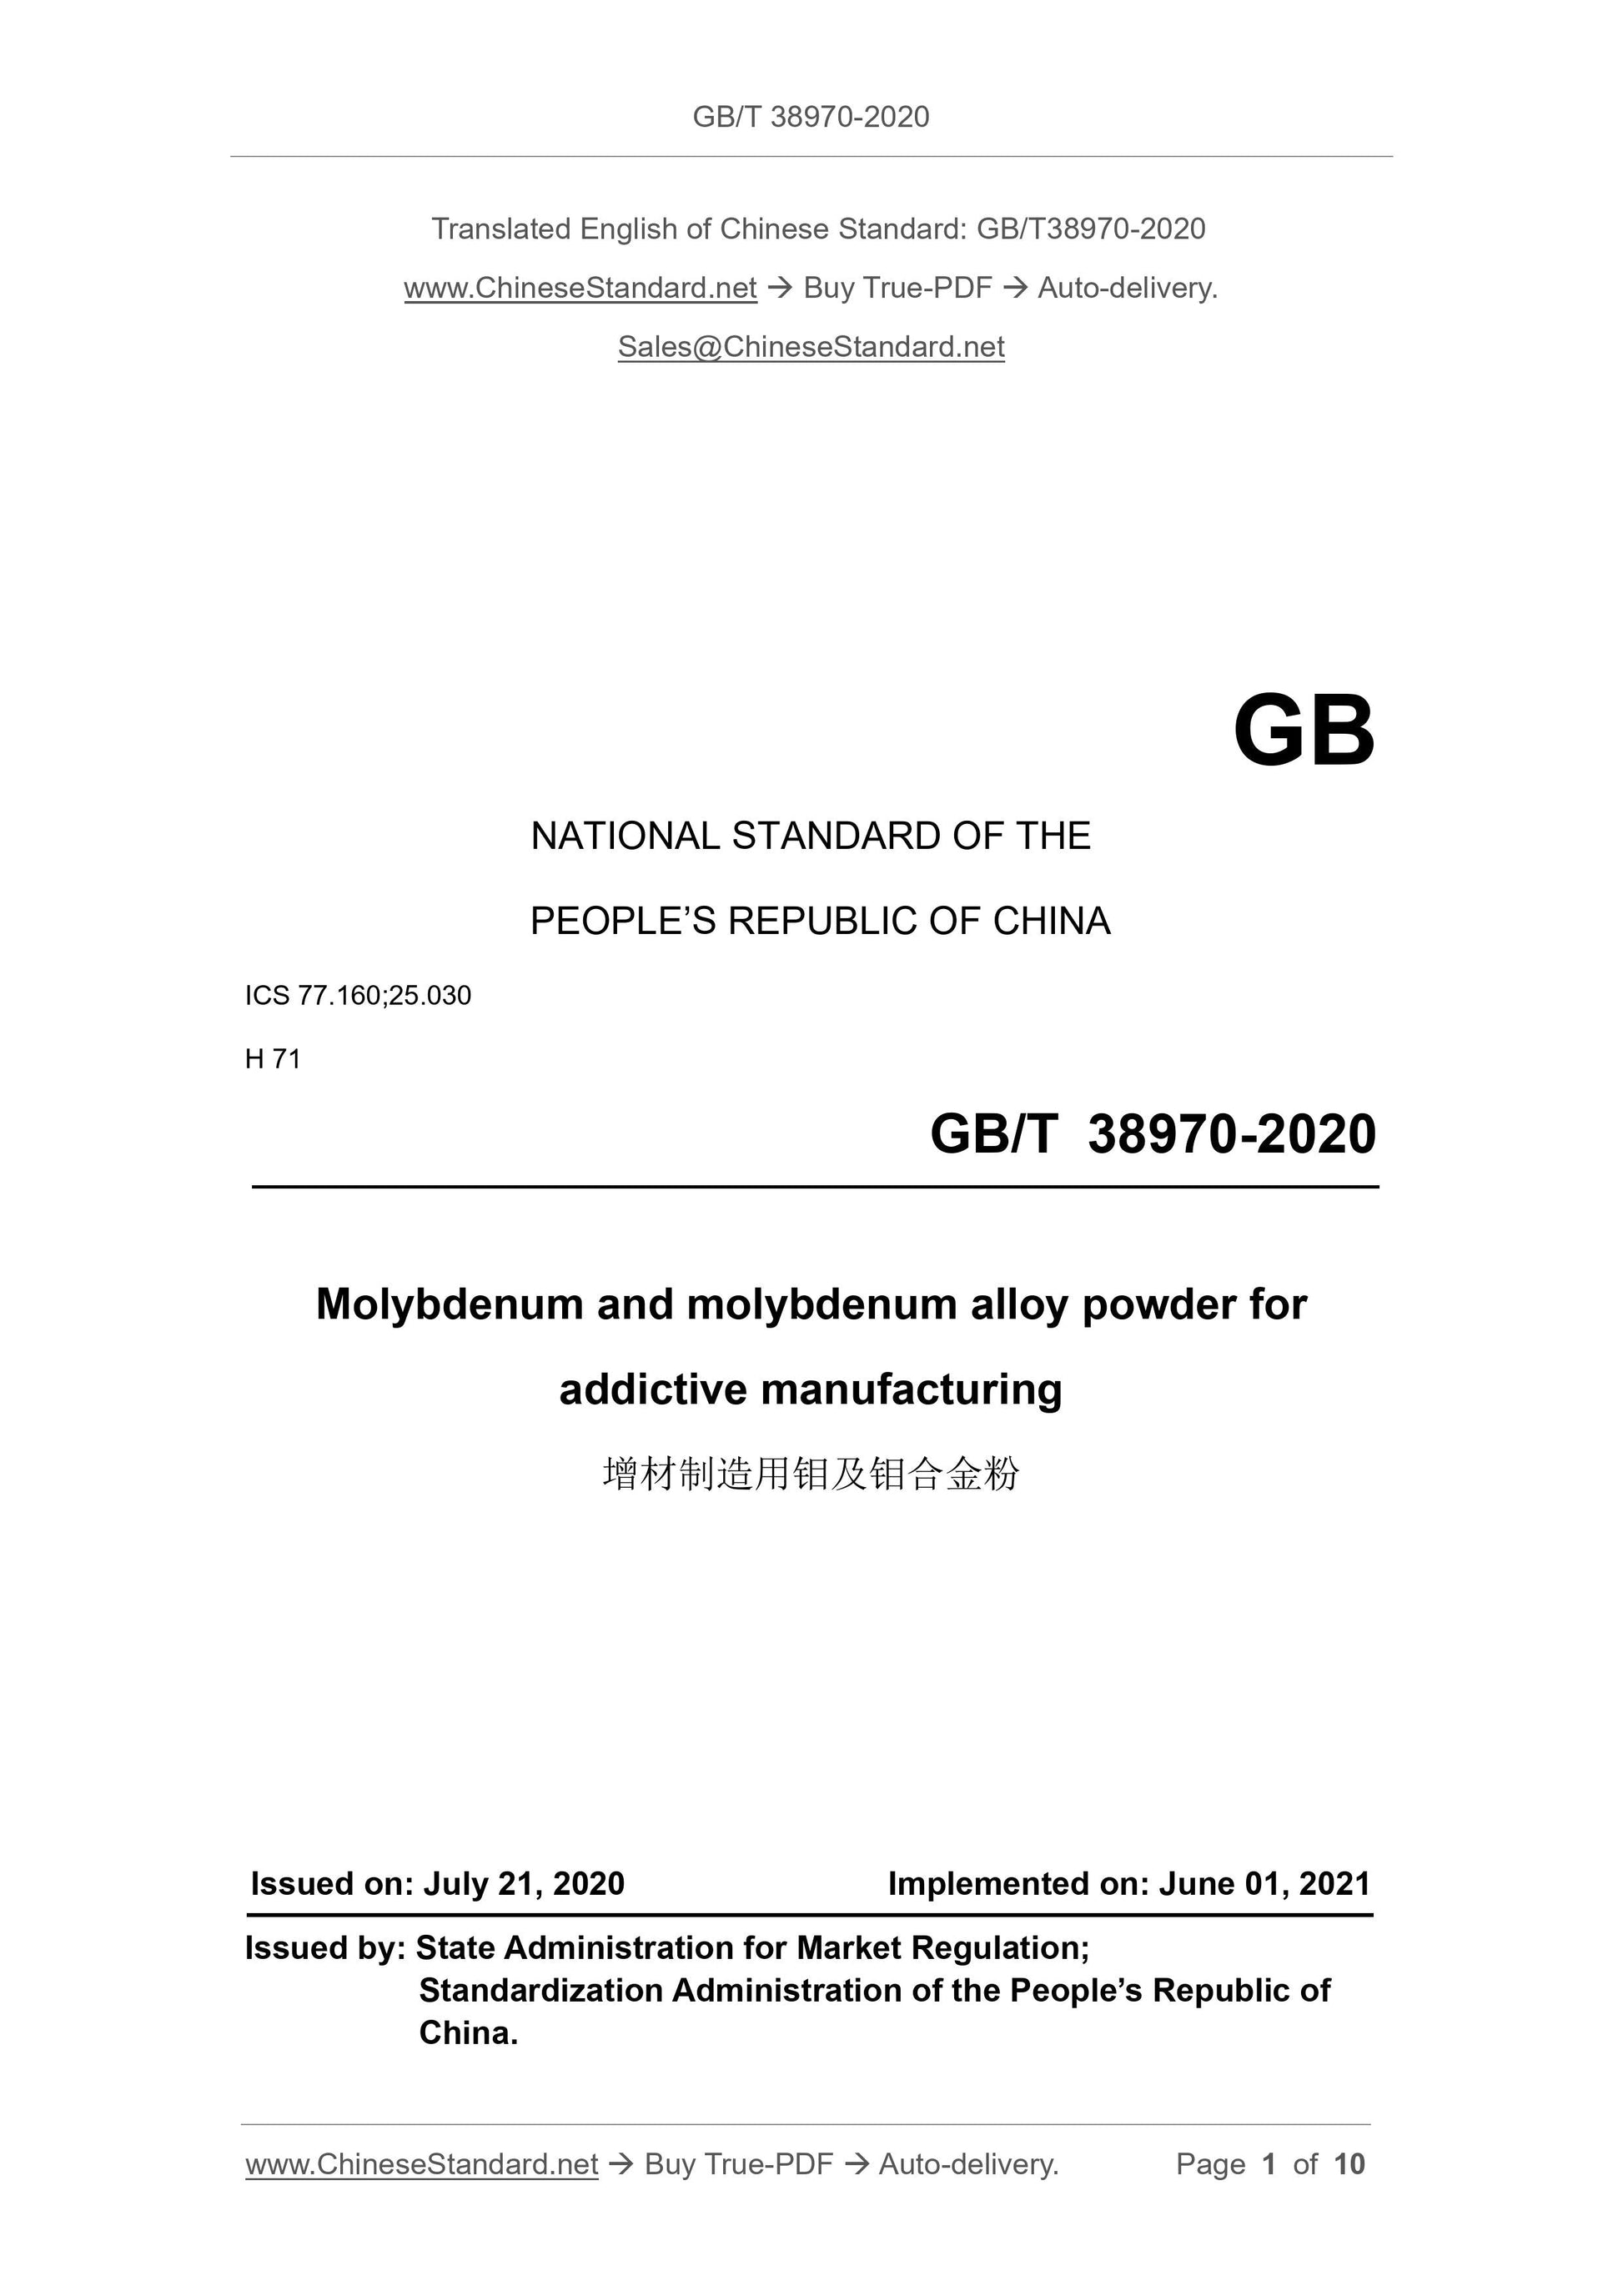 GB/T 38970-2020 Page 1